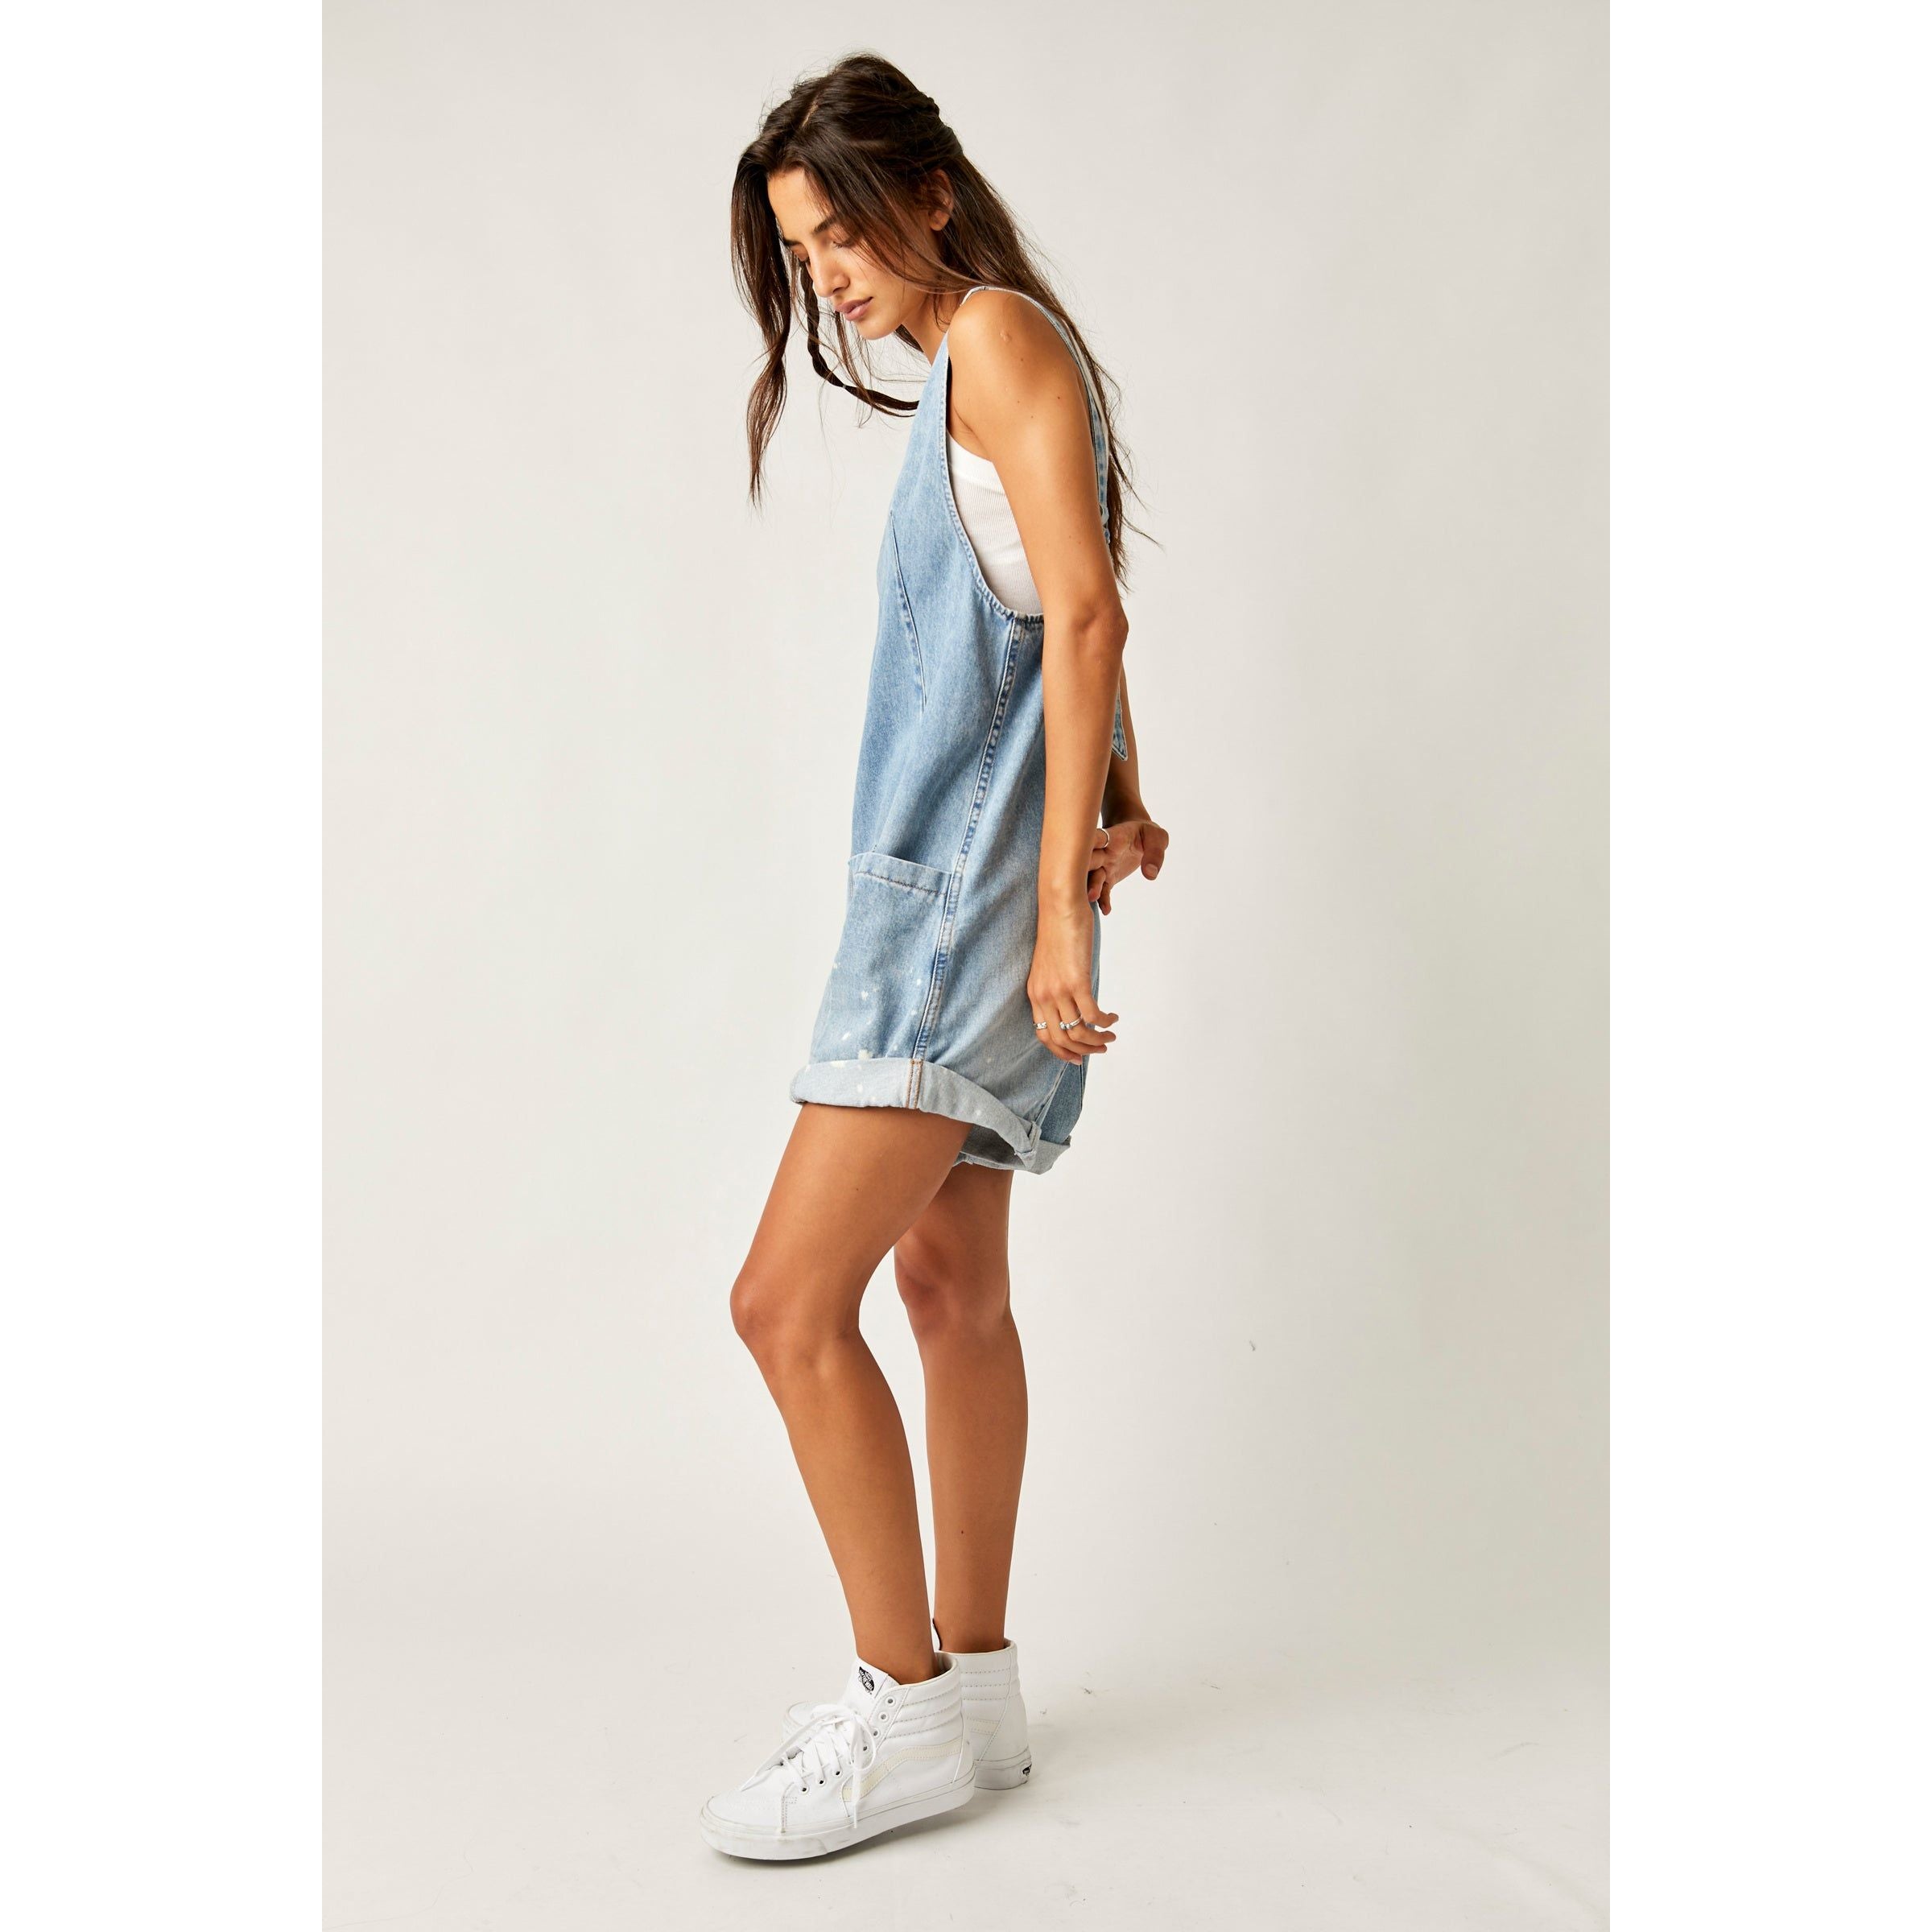 Free People - High Roller Shortall in Bright Eyes